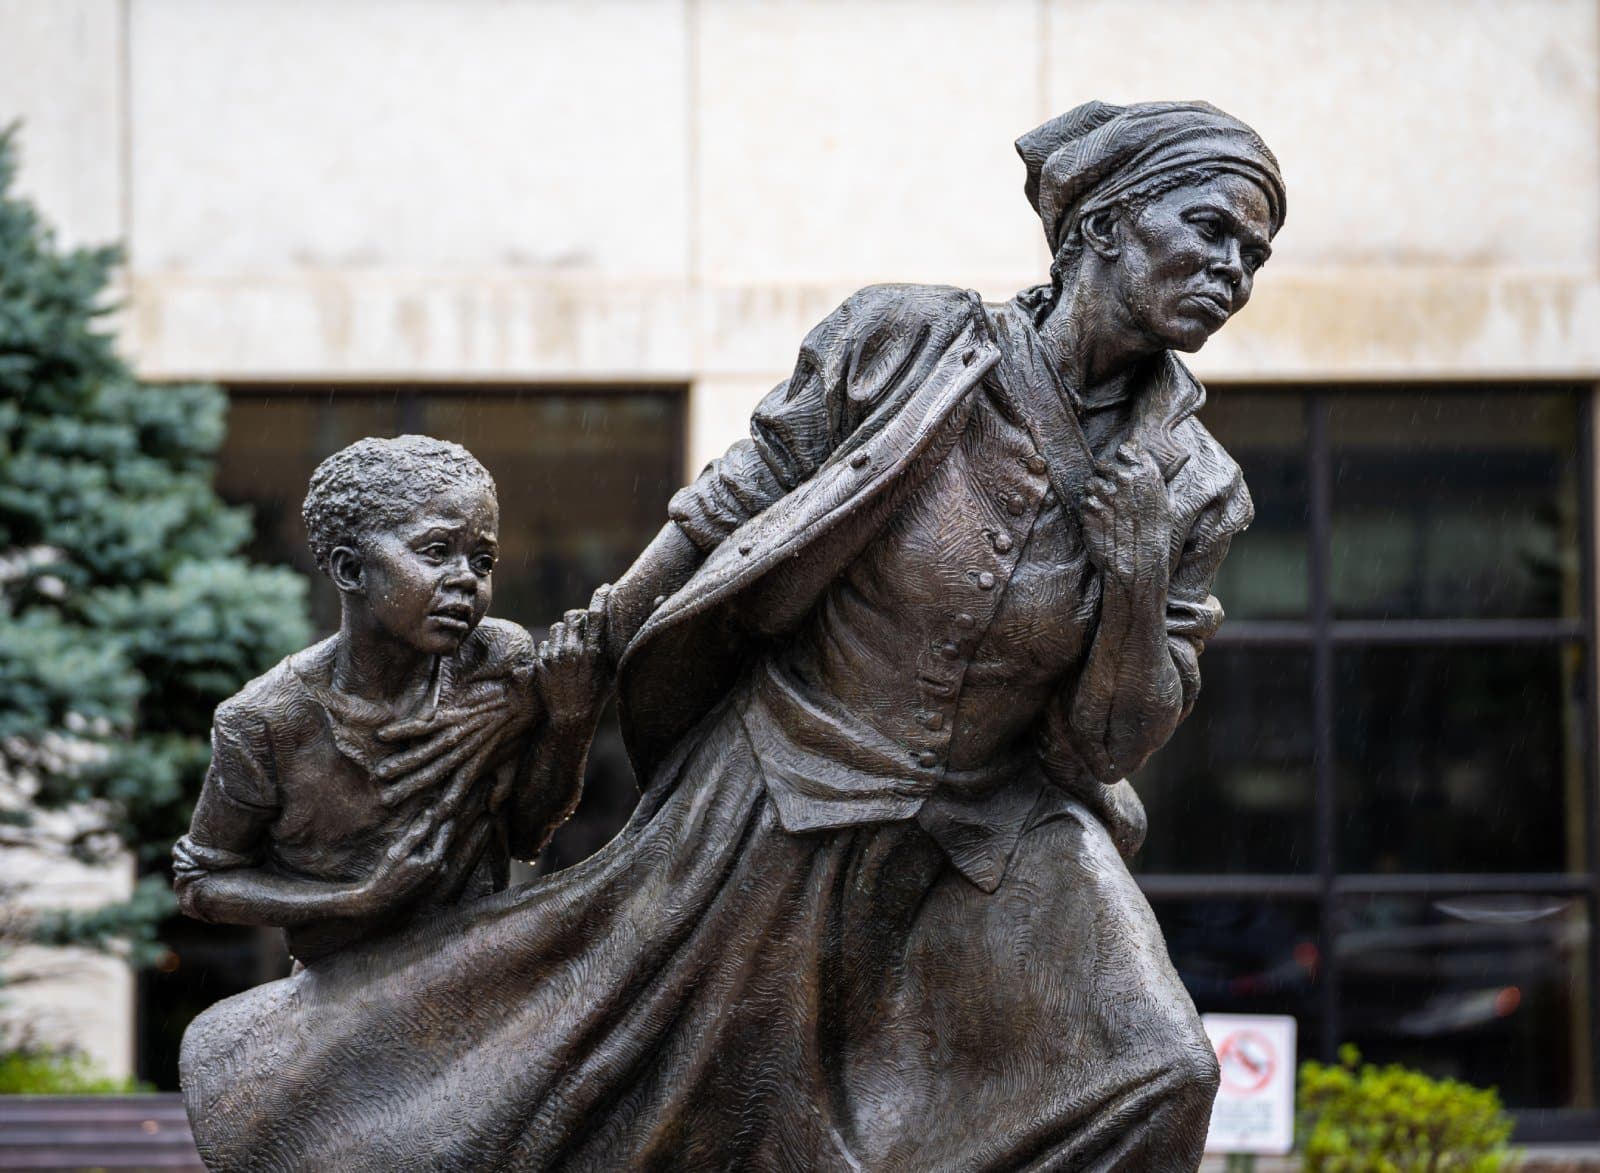 Image Credit: Shutterstock / Brian Logan Photography <p><span>Known as “Moses,” Tubman’s daring missions to lead slaves to freedom via the Underground Railroad cemented her status as an icon of courage and liberation.</span></p>